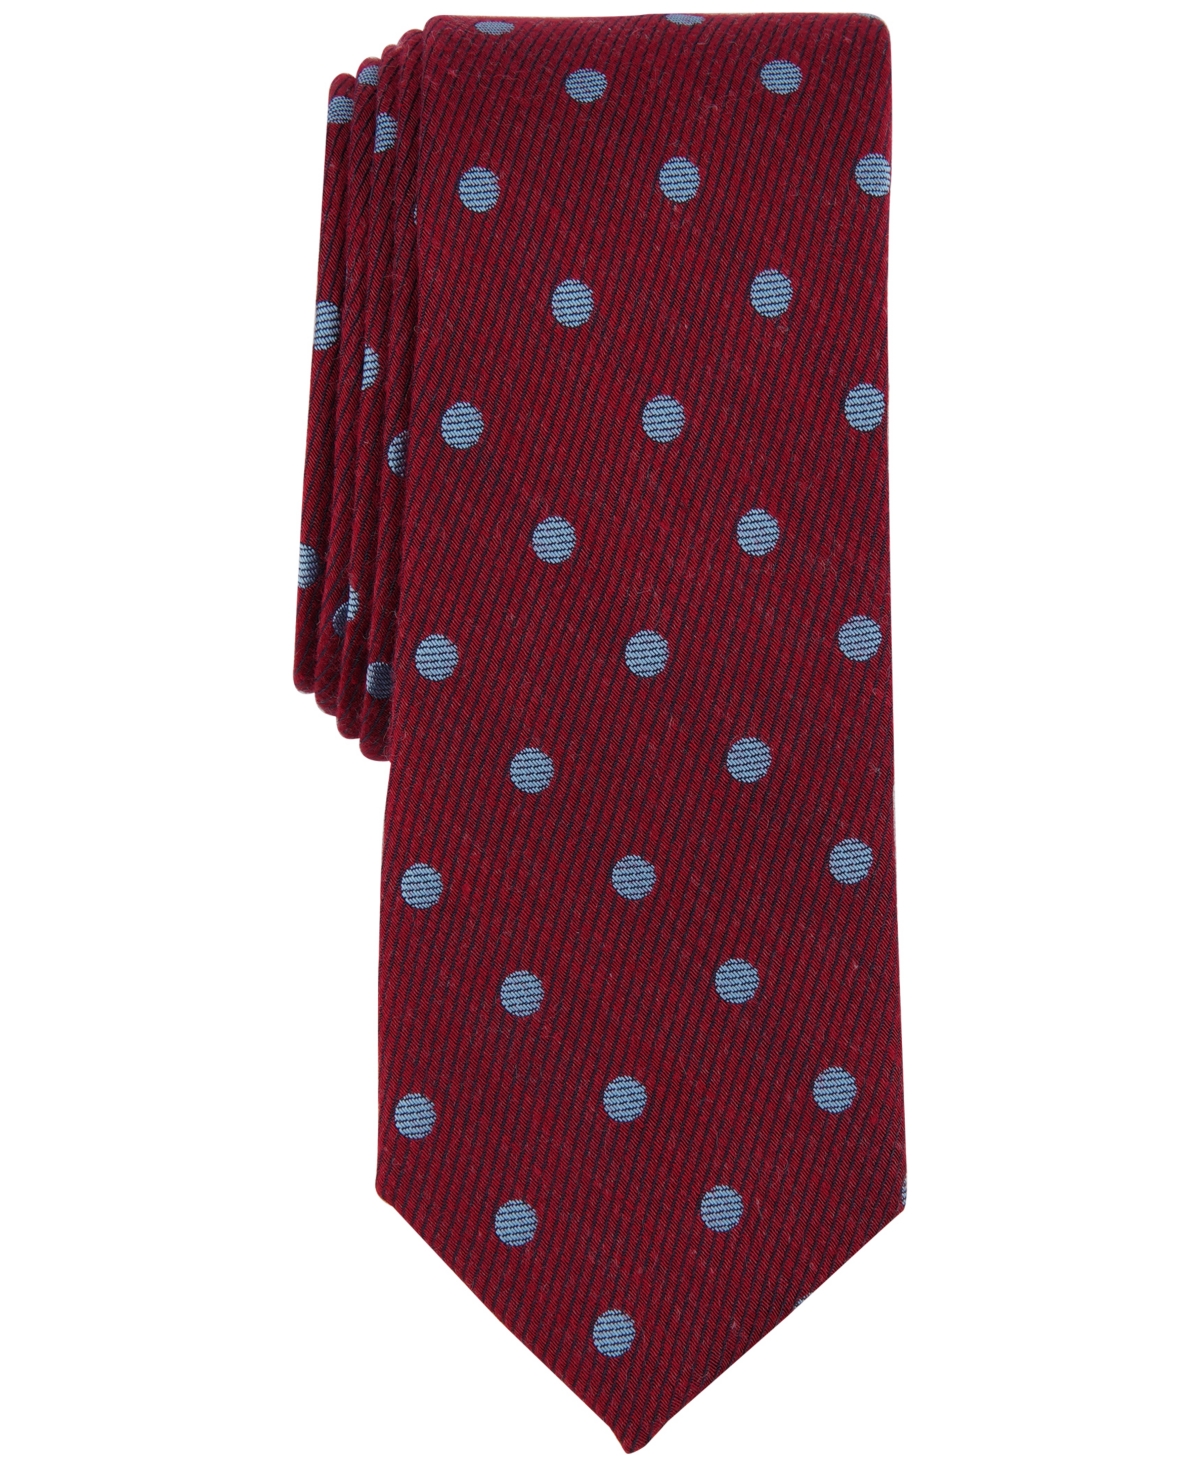 Men's Blyth Dot-Print Tie, Created for Macy's - Red